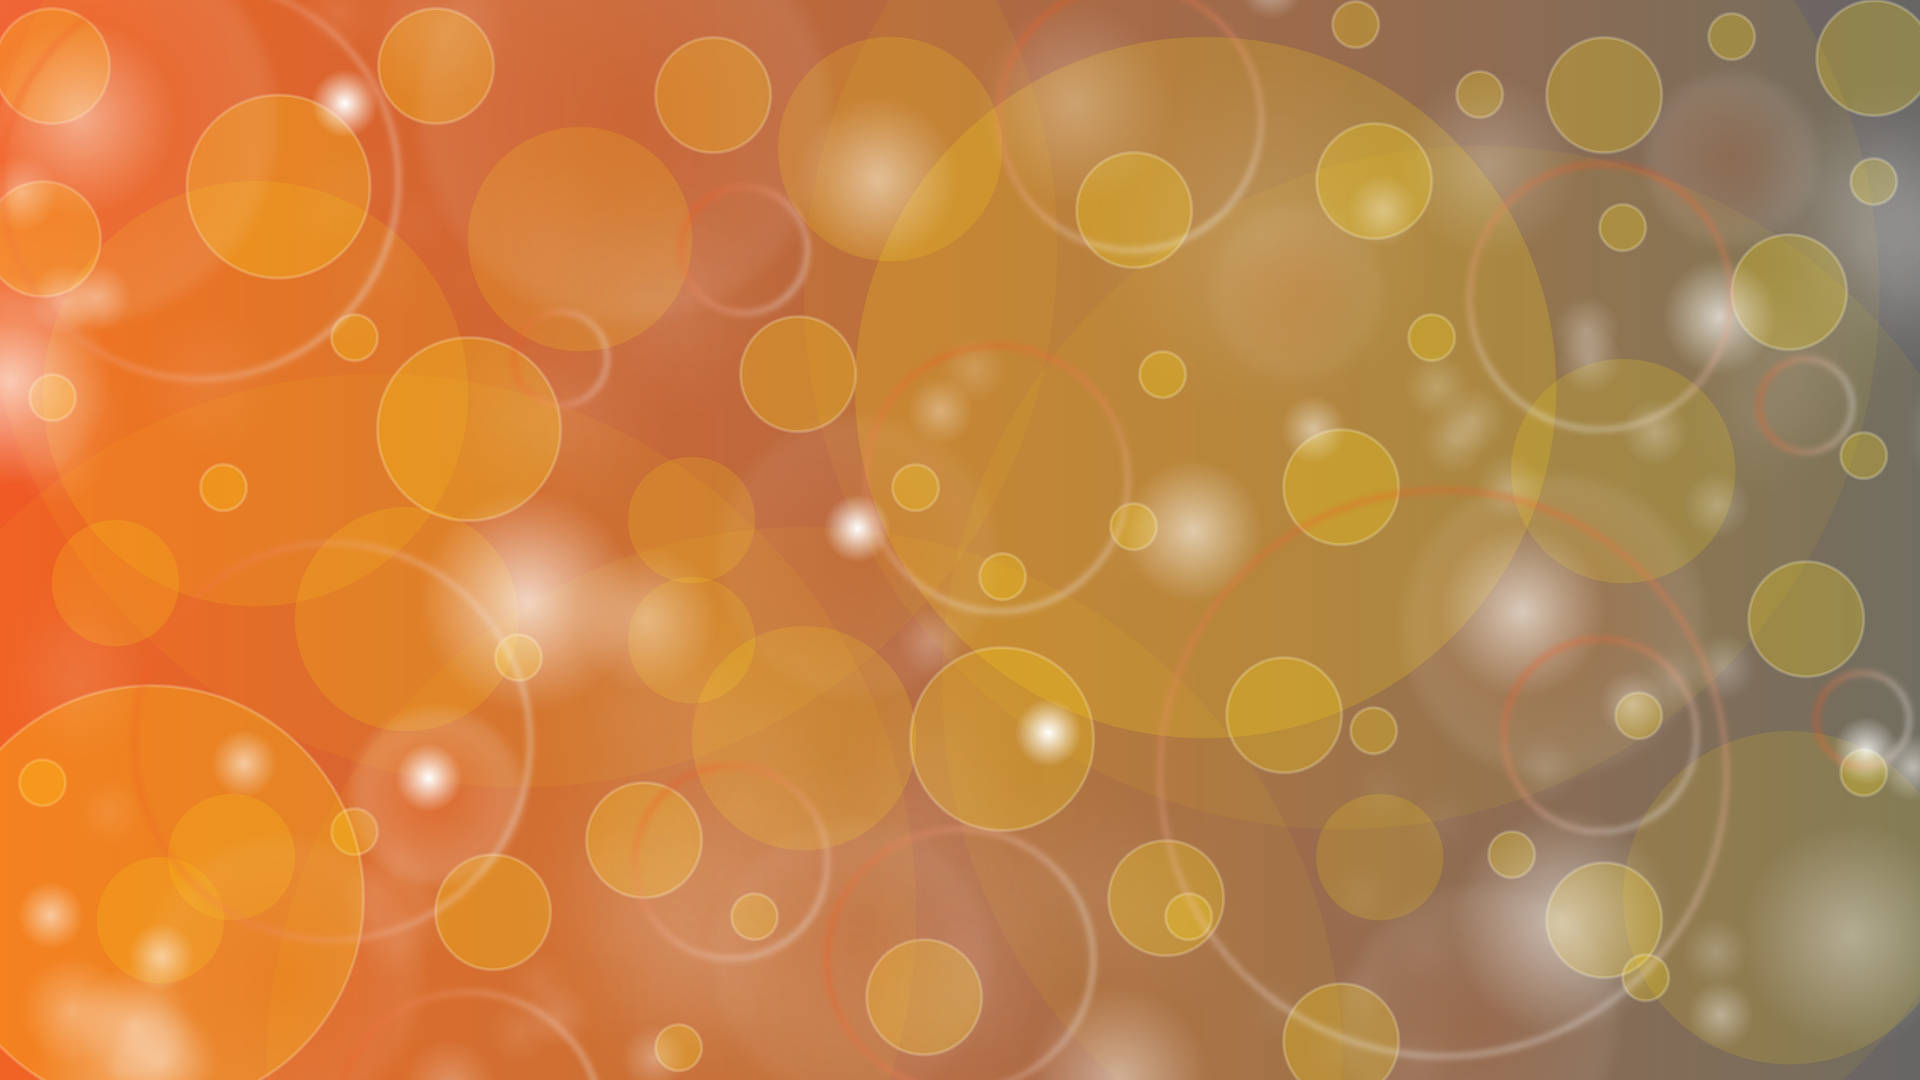 Abstract Orange And Yellow Circles Background